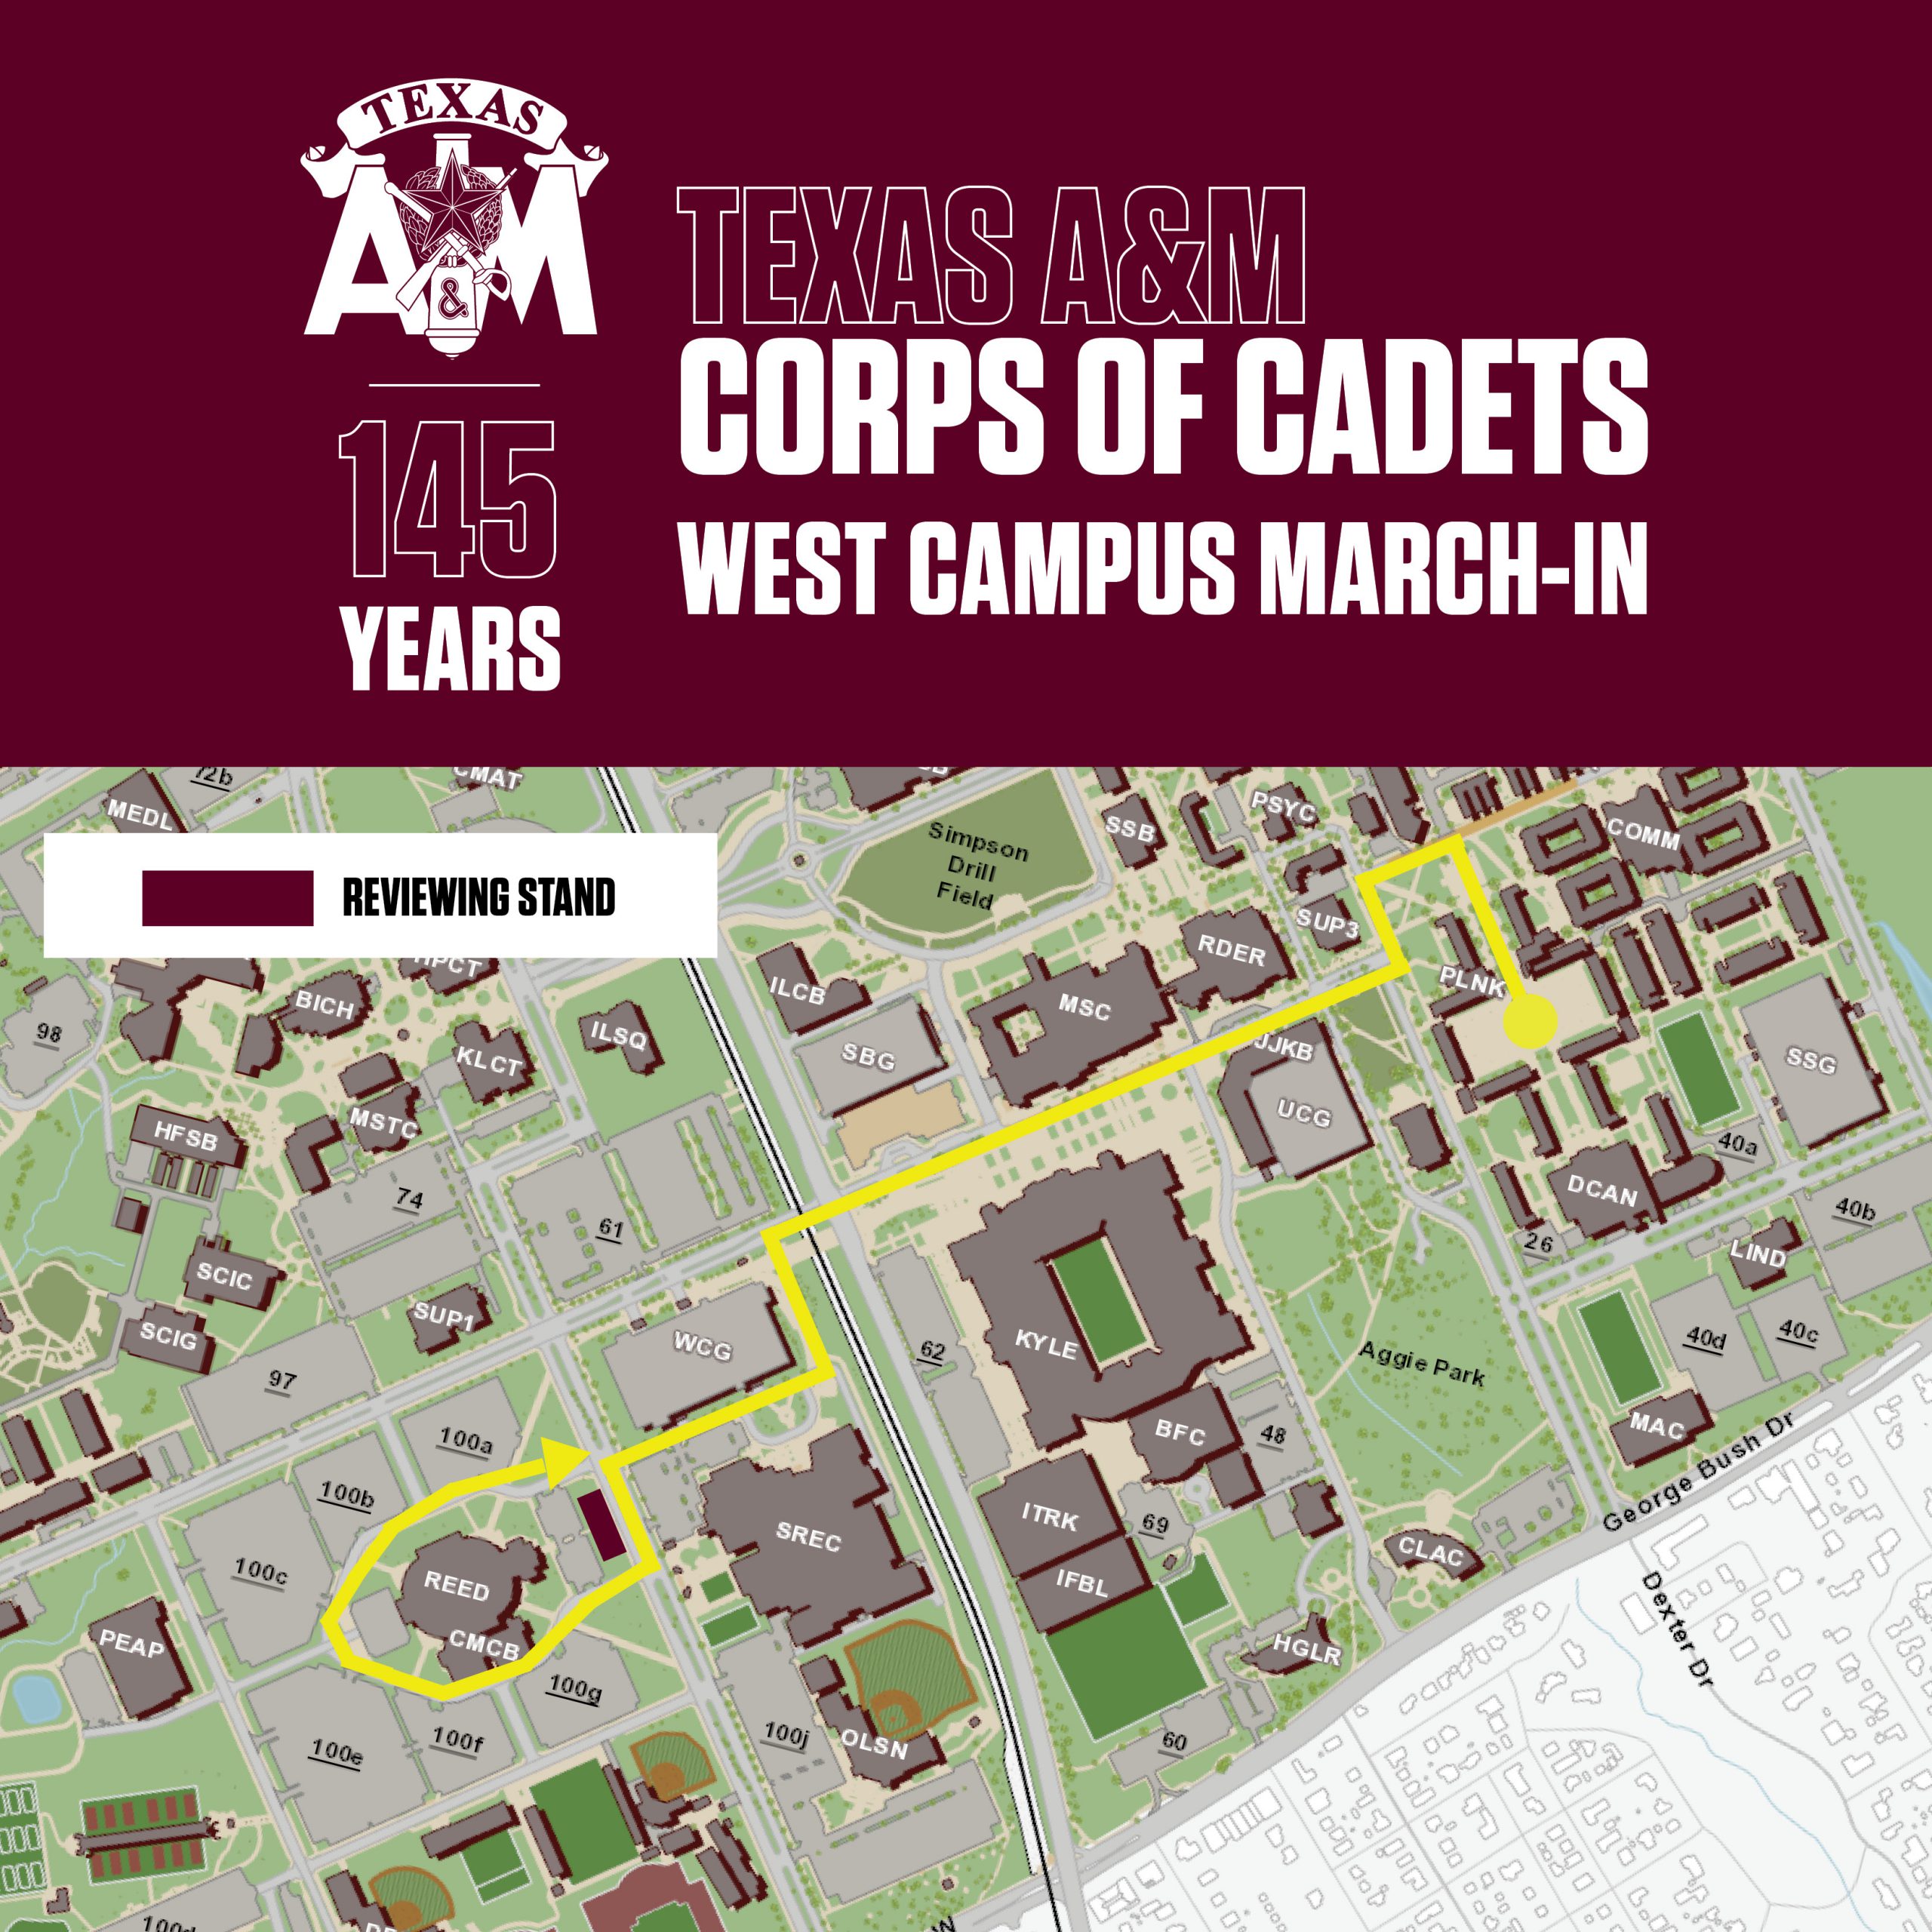 WEST Campus march in route